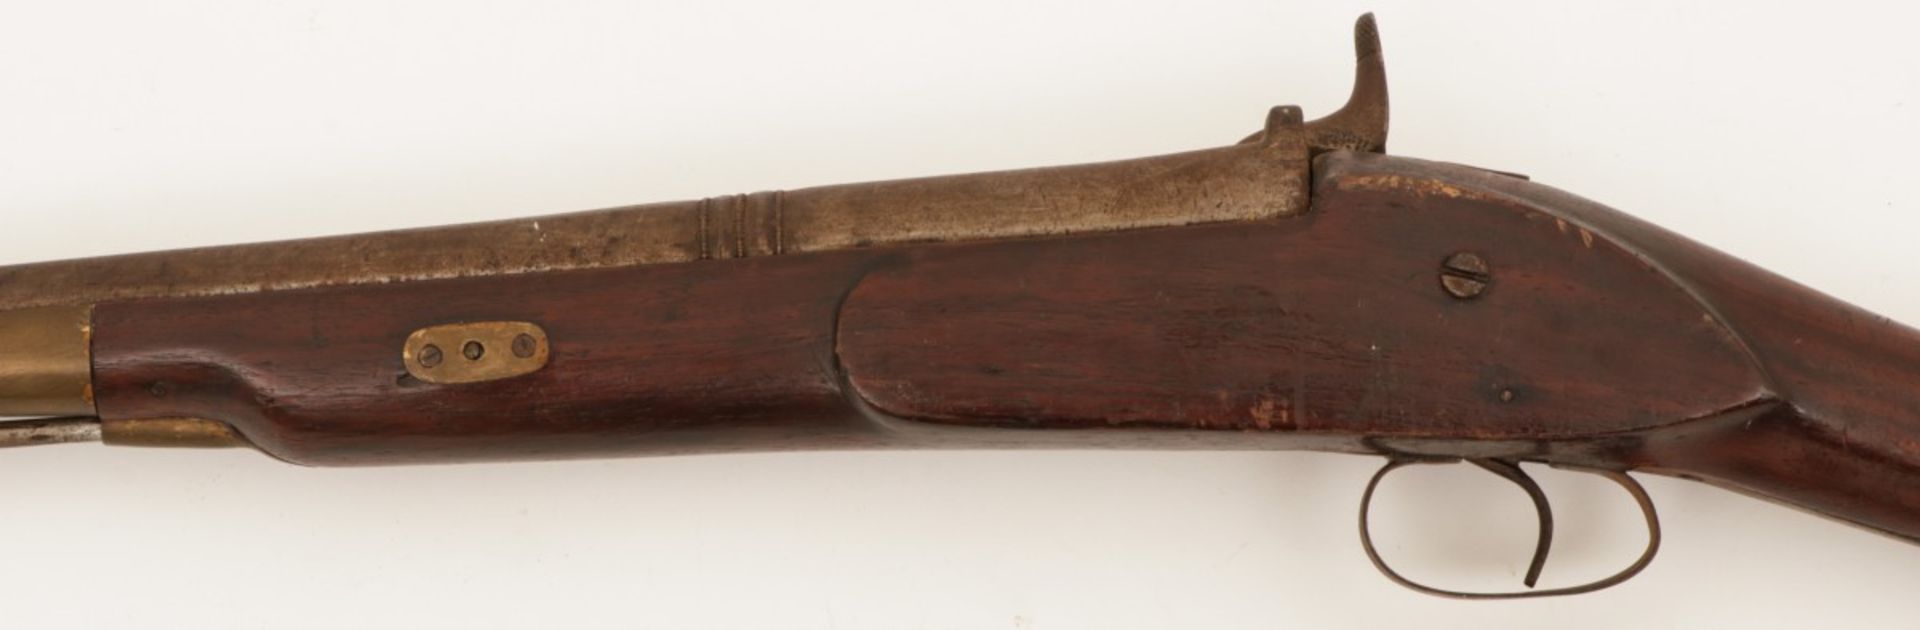 A flintlock percussion rifle, England, late 19th century. - Image 2 of 2